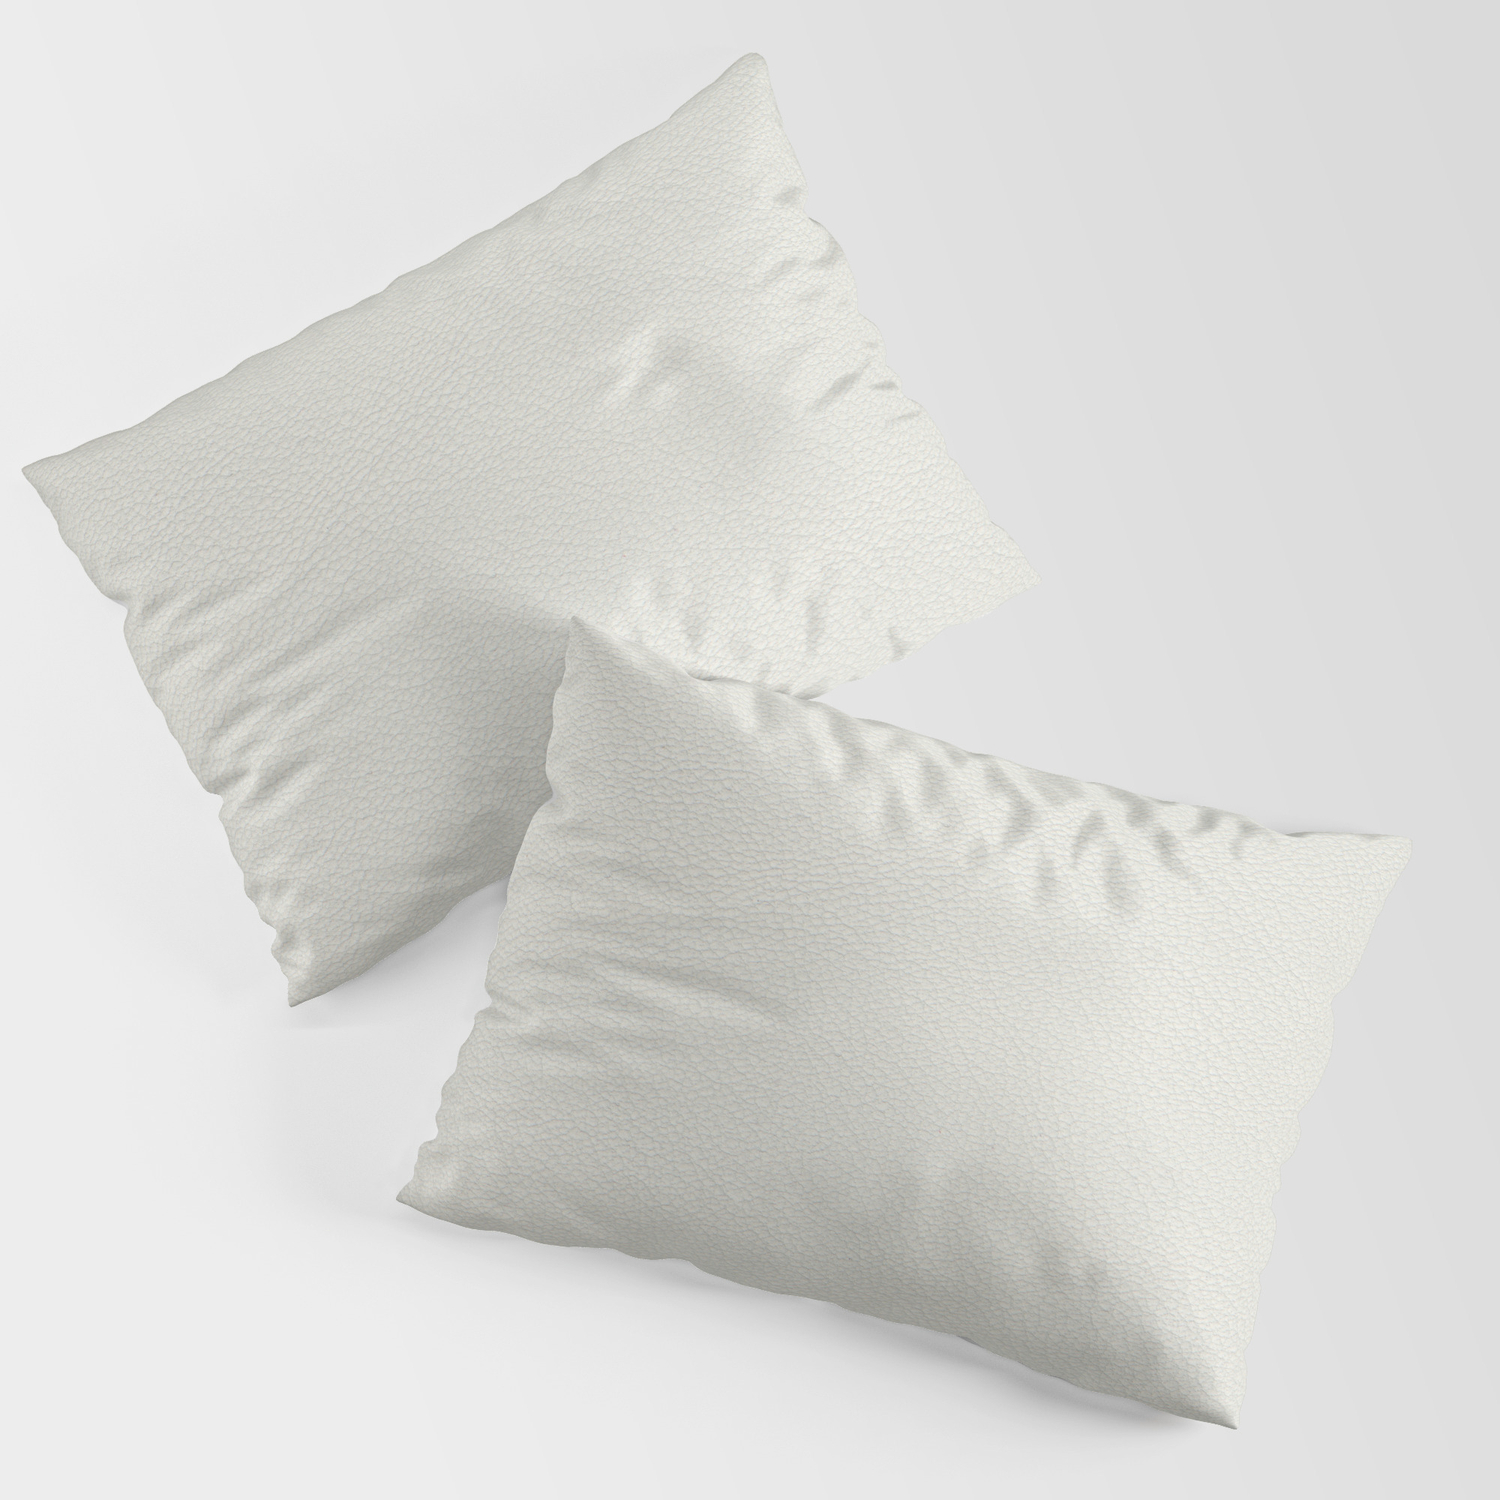 White Leather Texture Pillow Sham By, White Leather Pillows